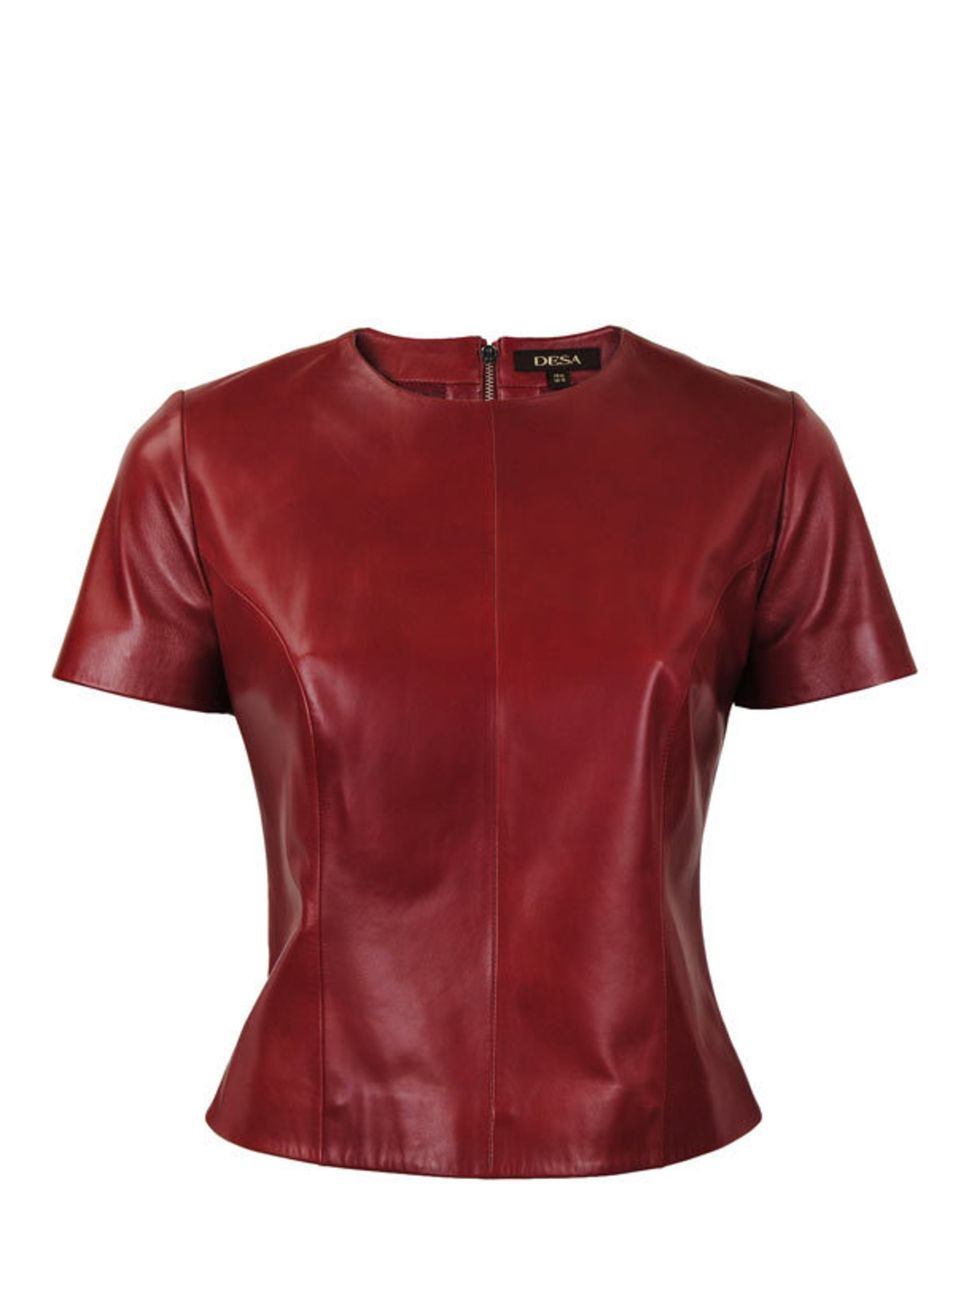 <p>Luxe leather separates show no sign of waning so tap into autumns 40s colour palette with this new T-shirt form Desa <a href="http://www.desa.uk.com/p-2092-minerva-leather-t-shirt.aspx">Desa</a> leather T-shirt, £229</p>